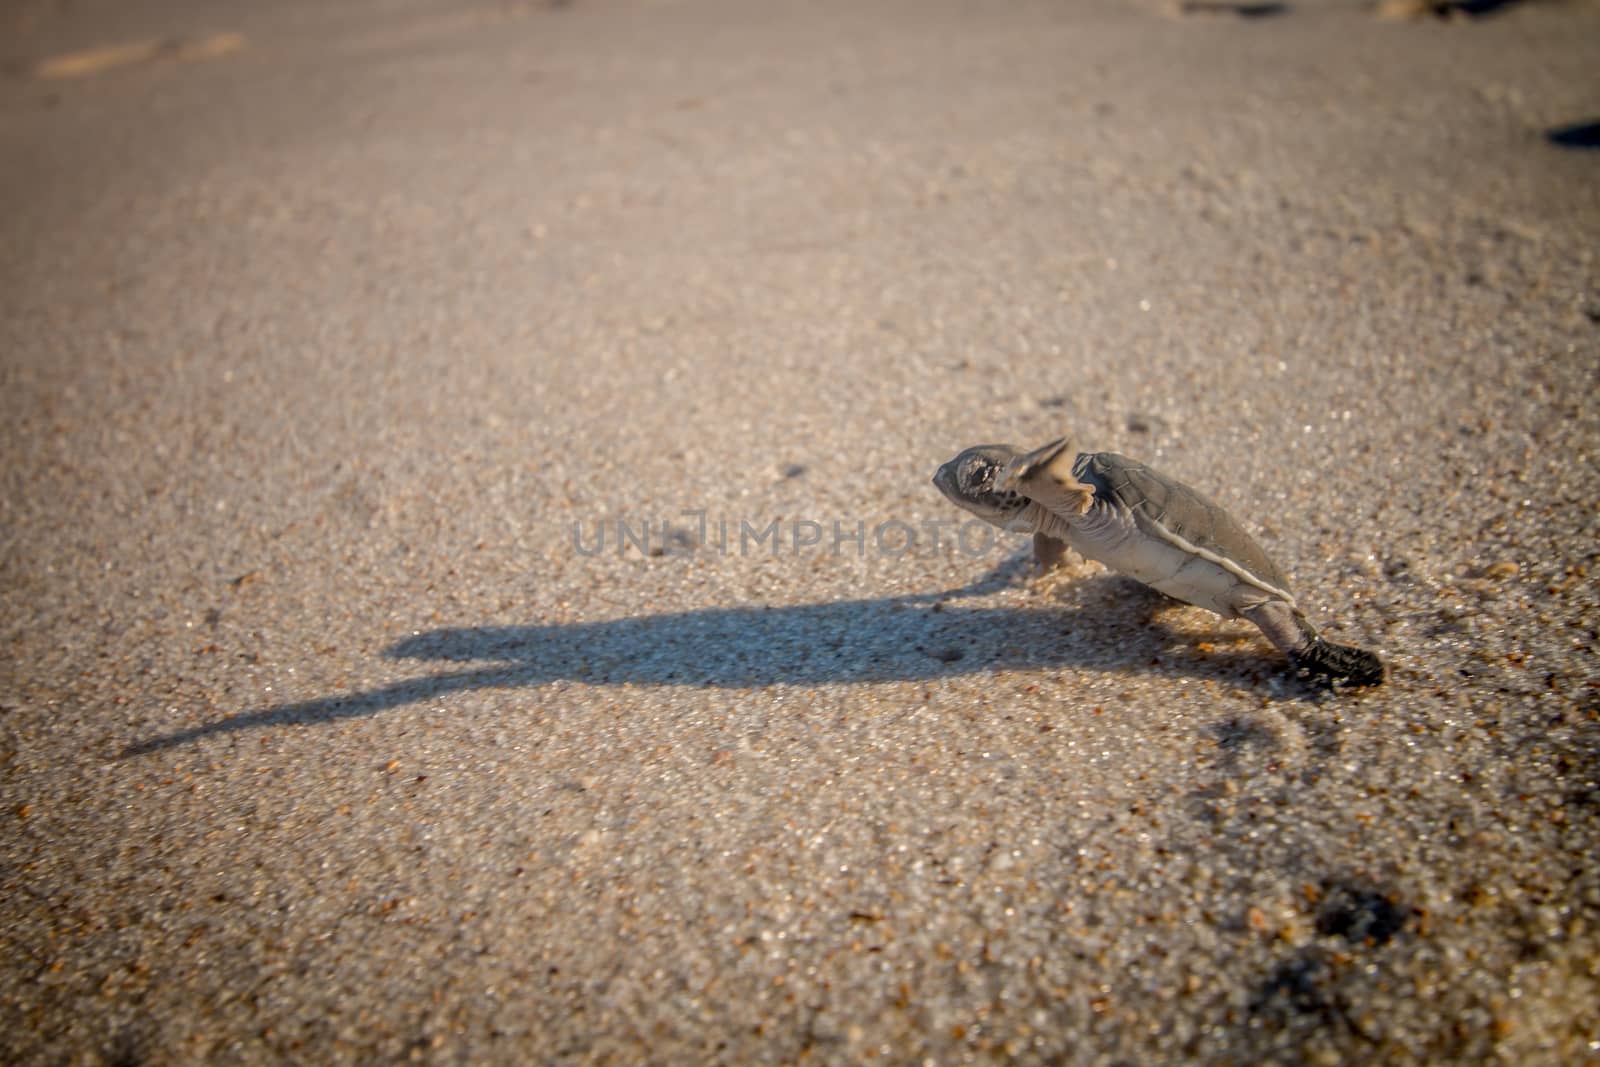 Green sea turtle hatchling on the beach. by Simoneemanphotography